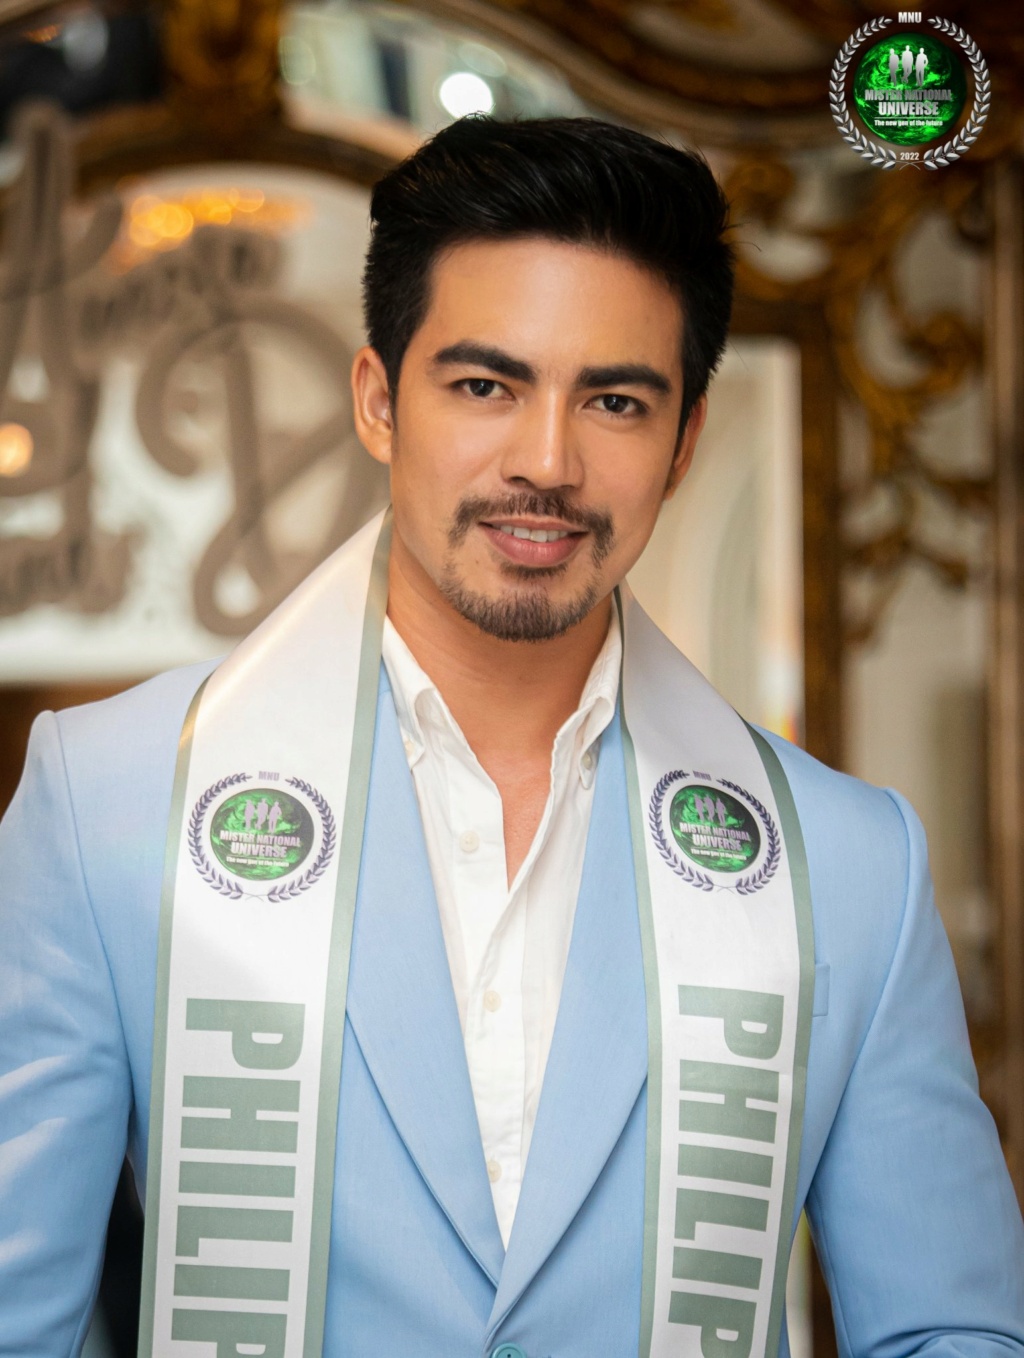 Mister National Universe 2022 is Việt Hoàng from Vietnam - Page 3 28648810